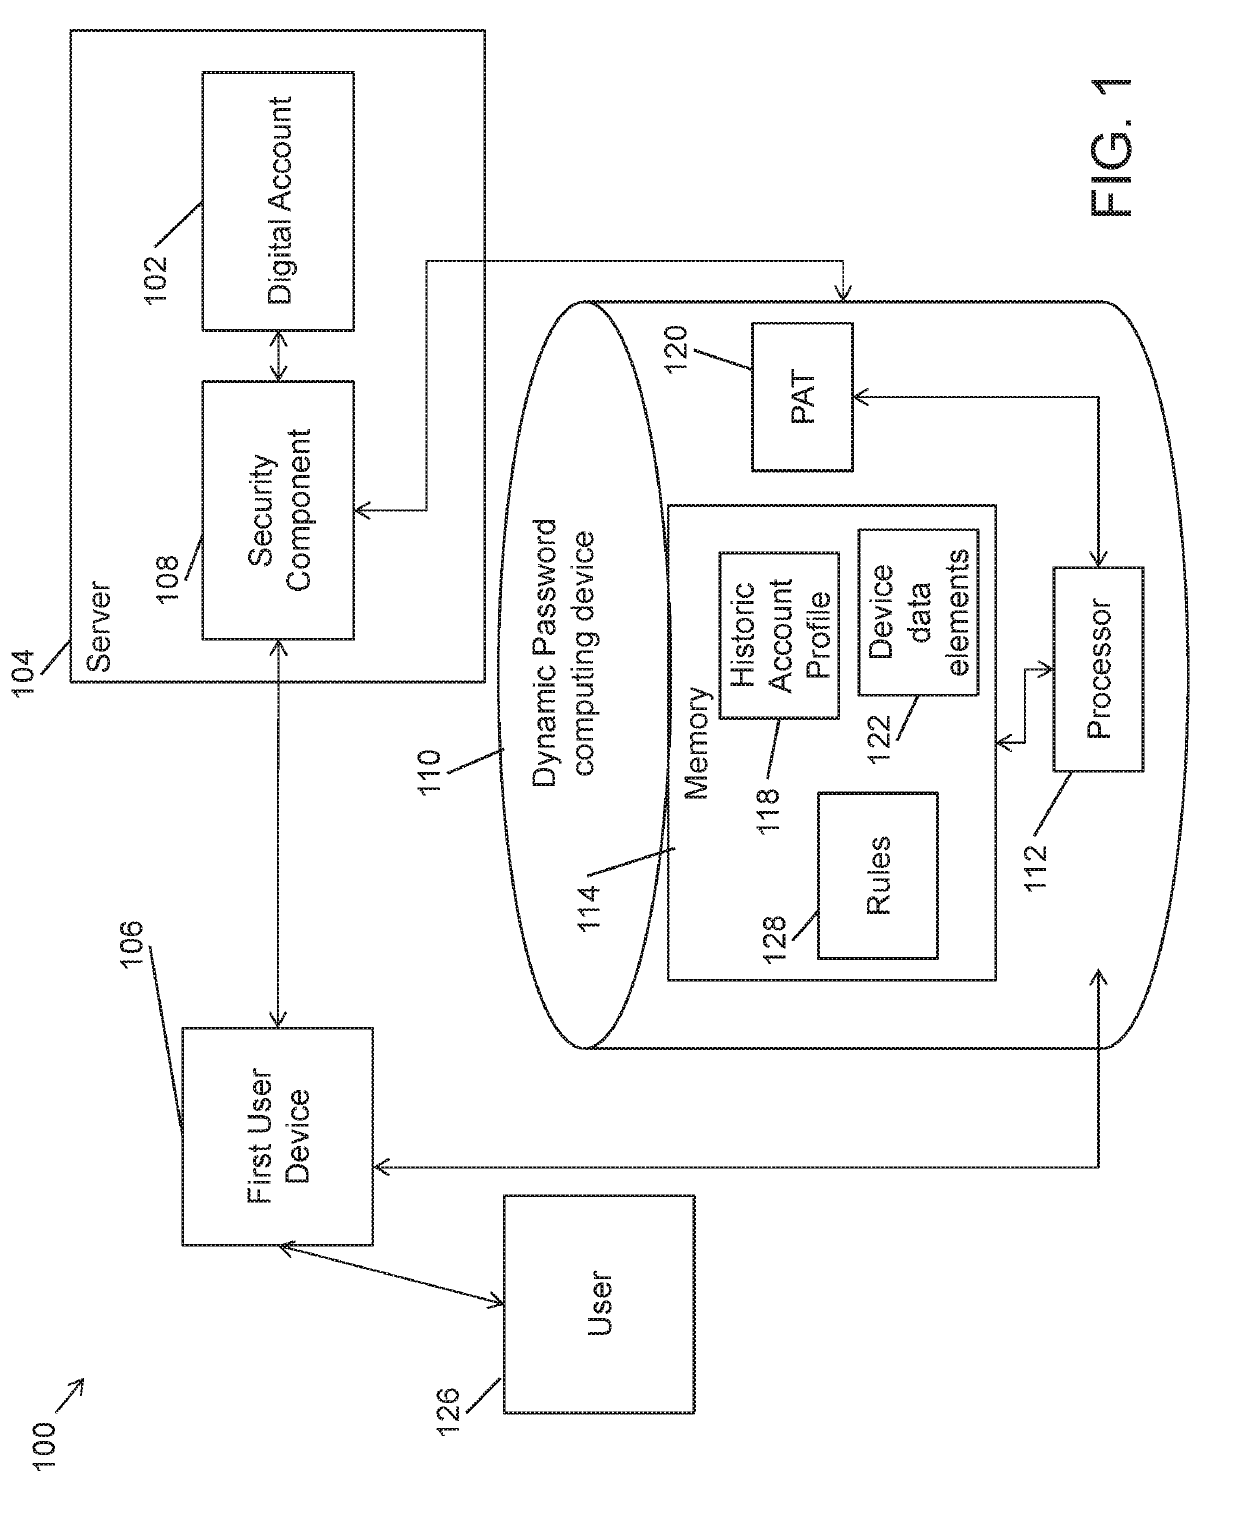 Systems and methods for dynamically adjusting a password attempt threshold